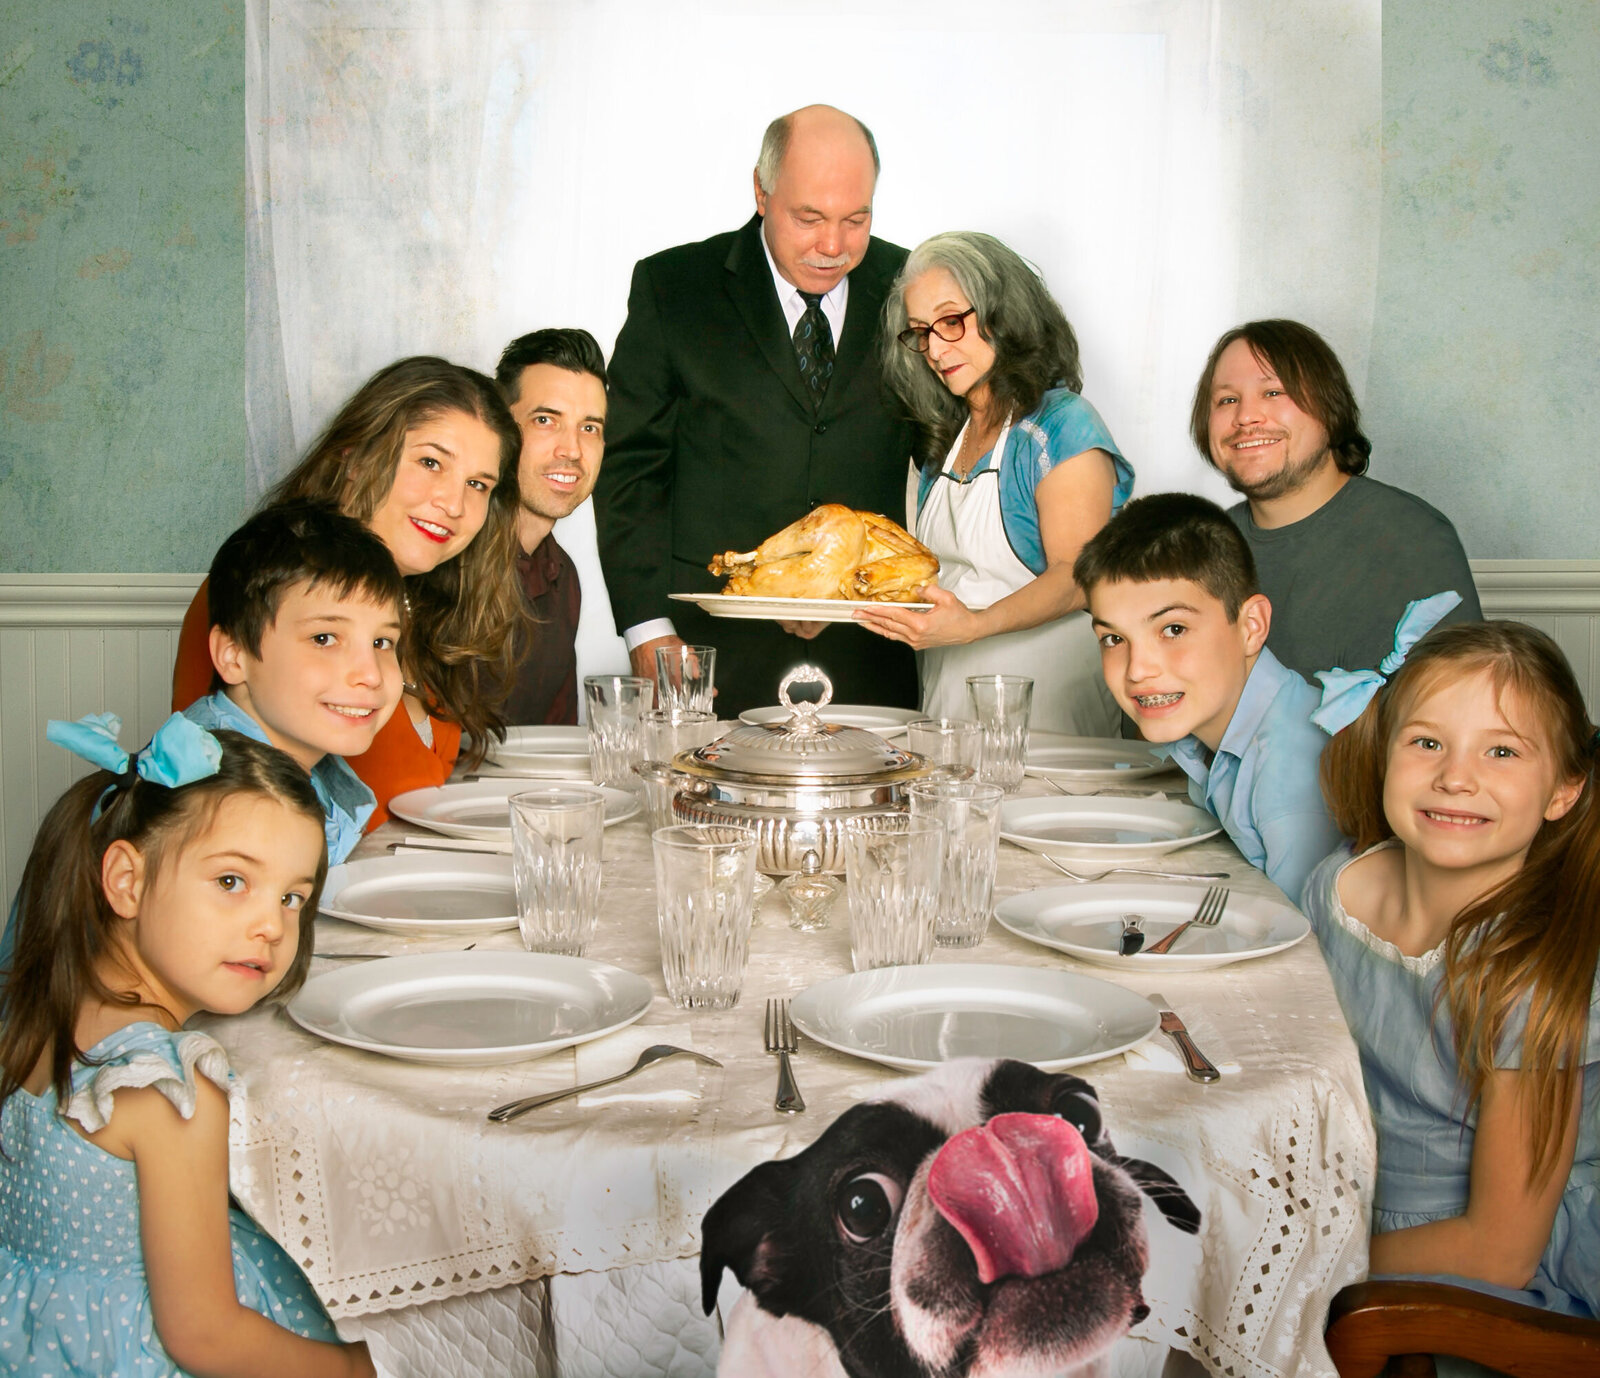 lehman-family-freedom-from-want-norman-rockwell-thanksgiving-inpsiration